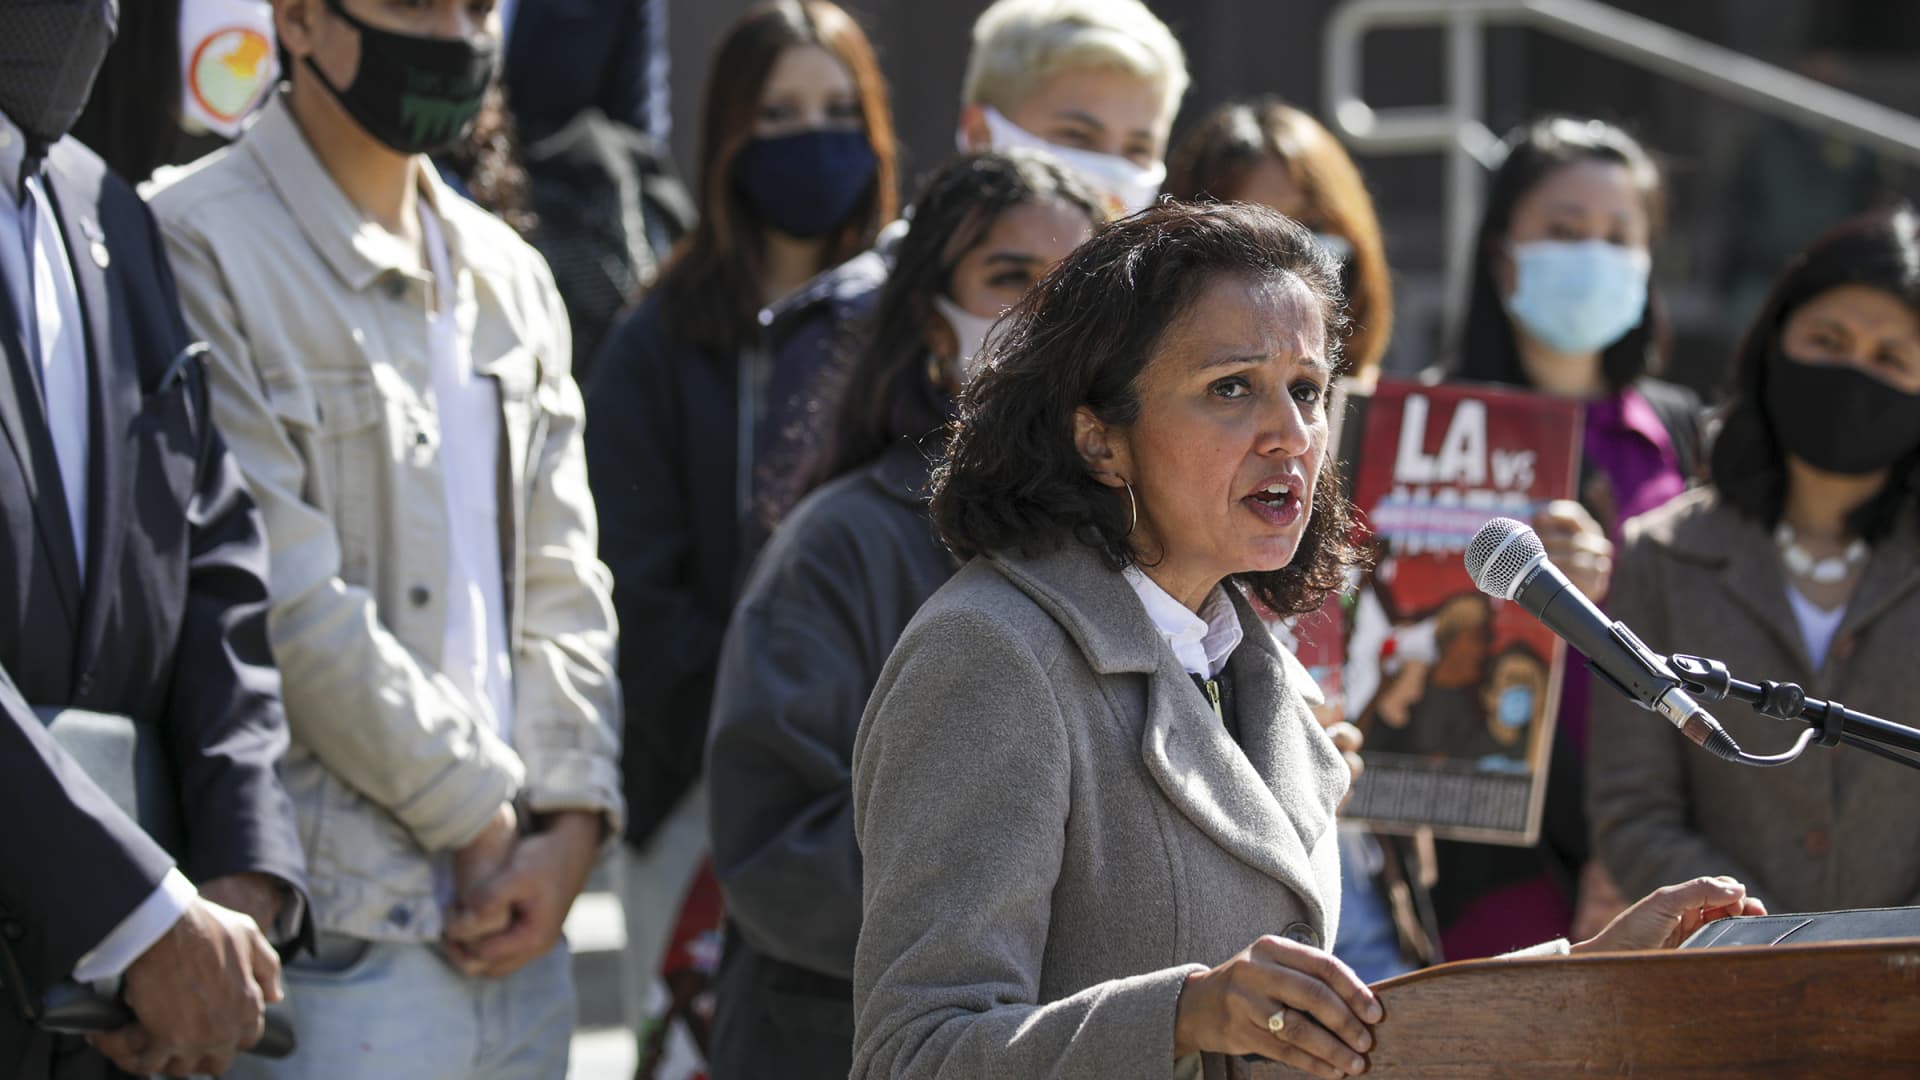 Manjusha Kulkarni, Asian Pacific Planning and Policy Council Executive Director, speaks against the hate and recent violence against Asian Americans at a rally held on the steps of County Hall of Administration on Wednesday, March 17, 2021 in Los Angeles, CA.